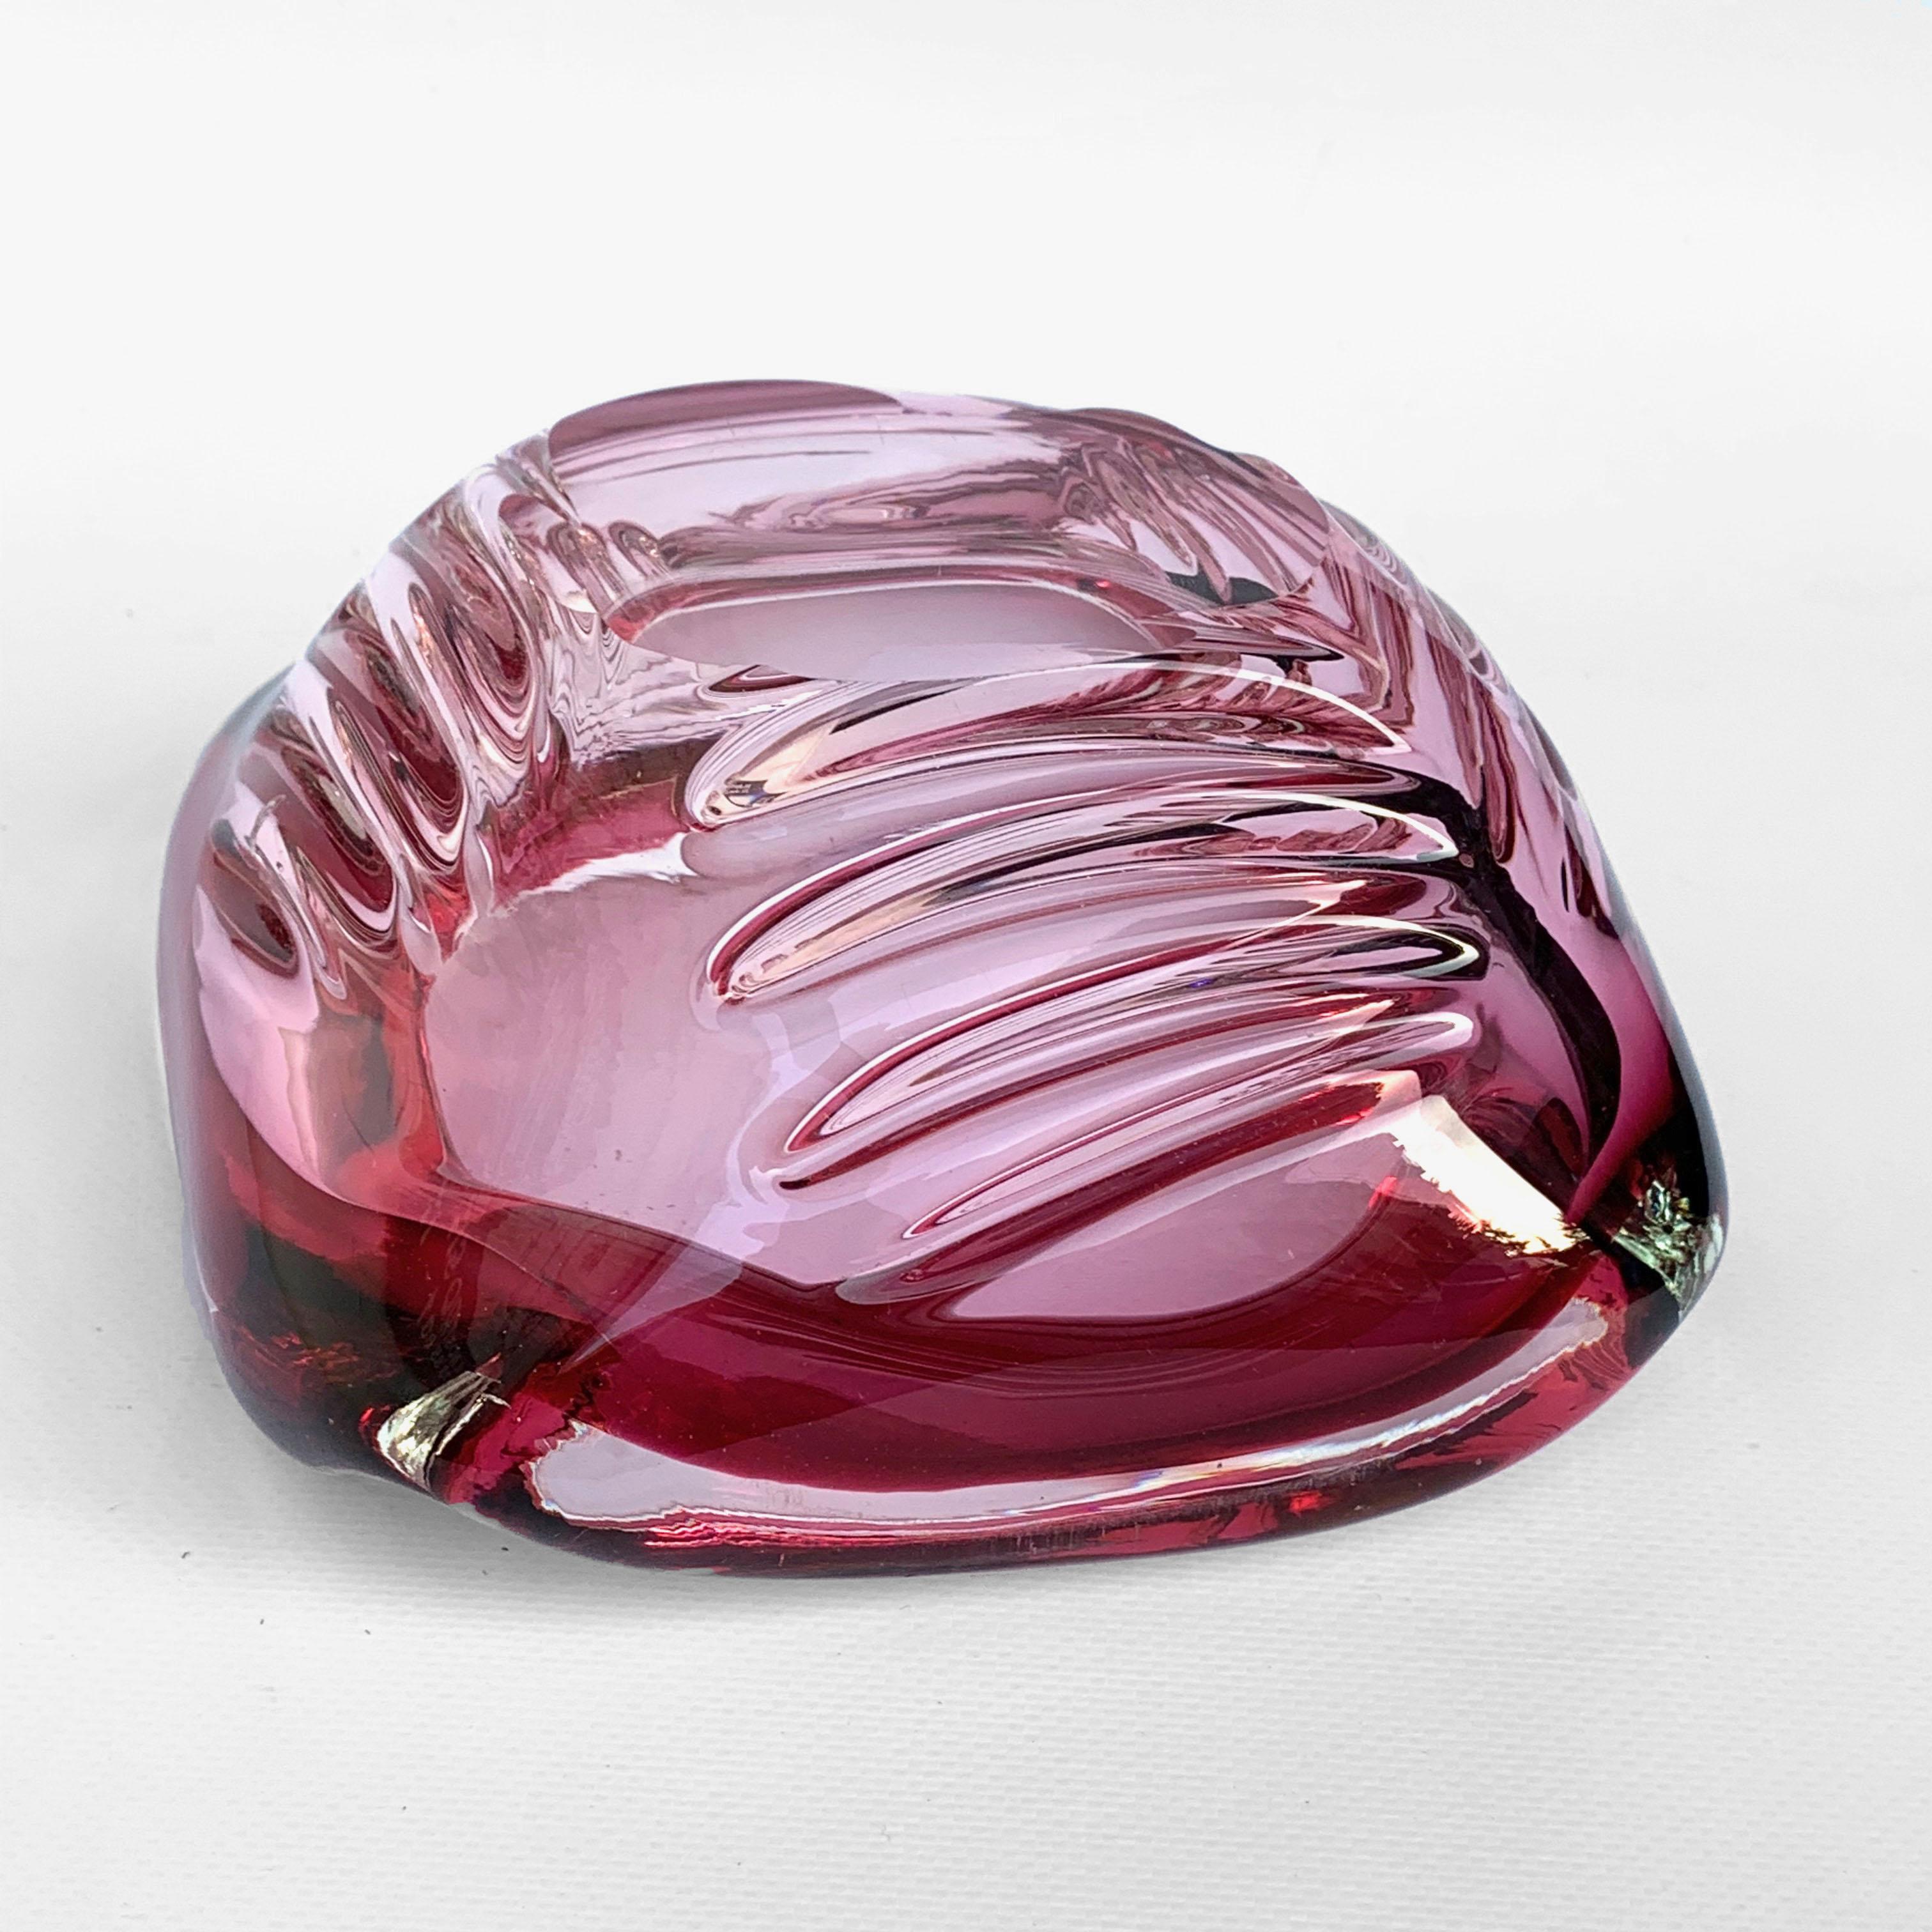 Seguso Handblown Pink, Purple and Blue Sommerso Murano Glass Bowl, Italy, 1960s For Sale 2